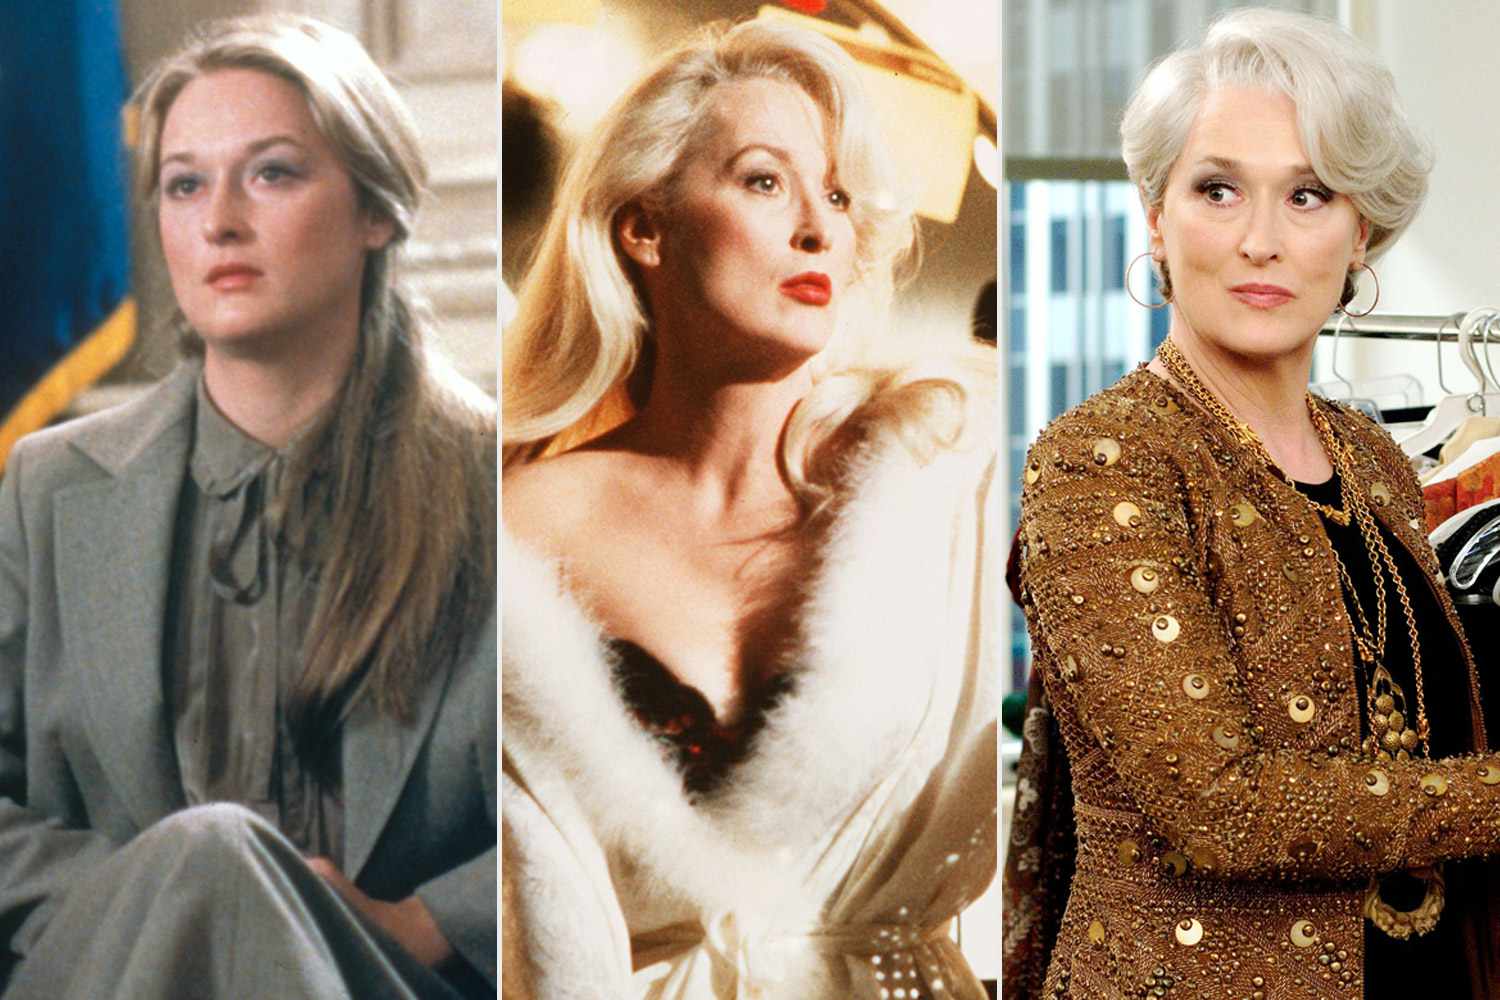 Young meryl hot streep The Untold